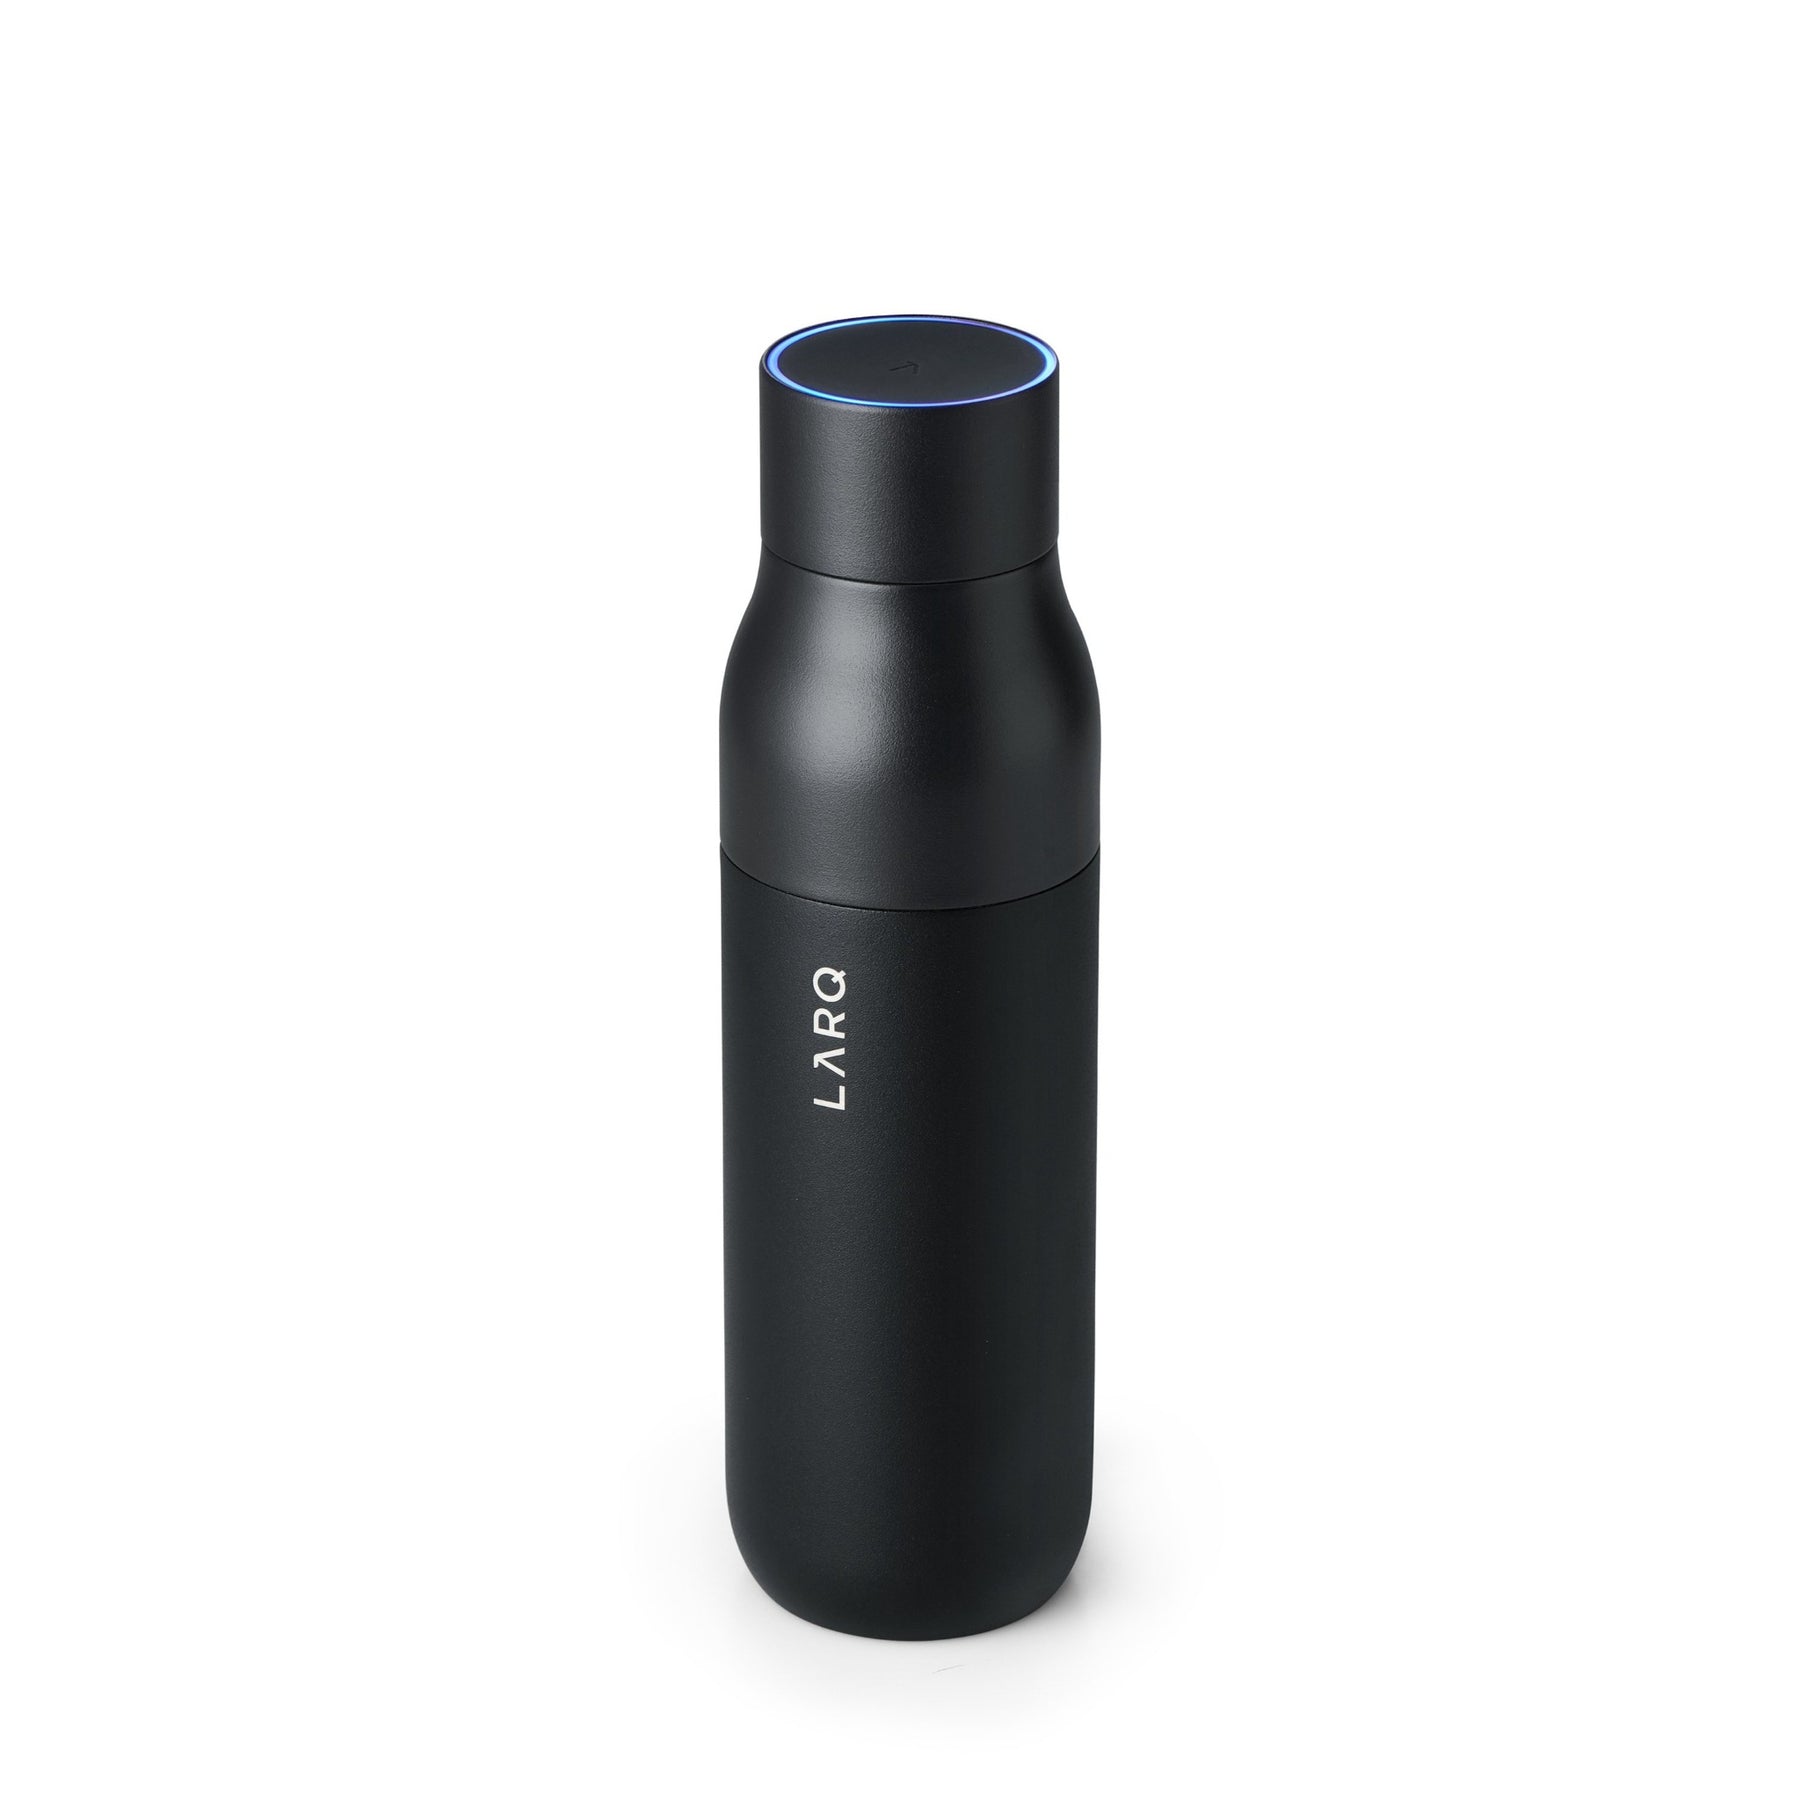 Larq review: We tried the self-cleaning water bottle